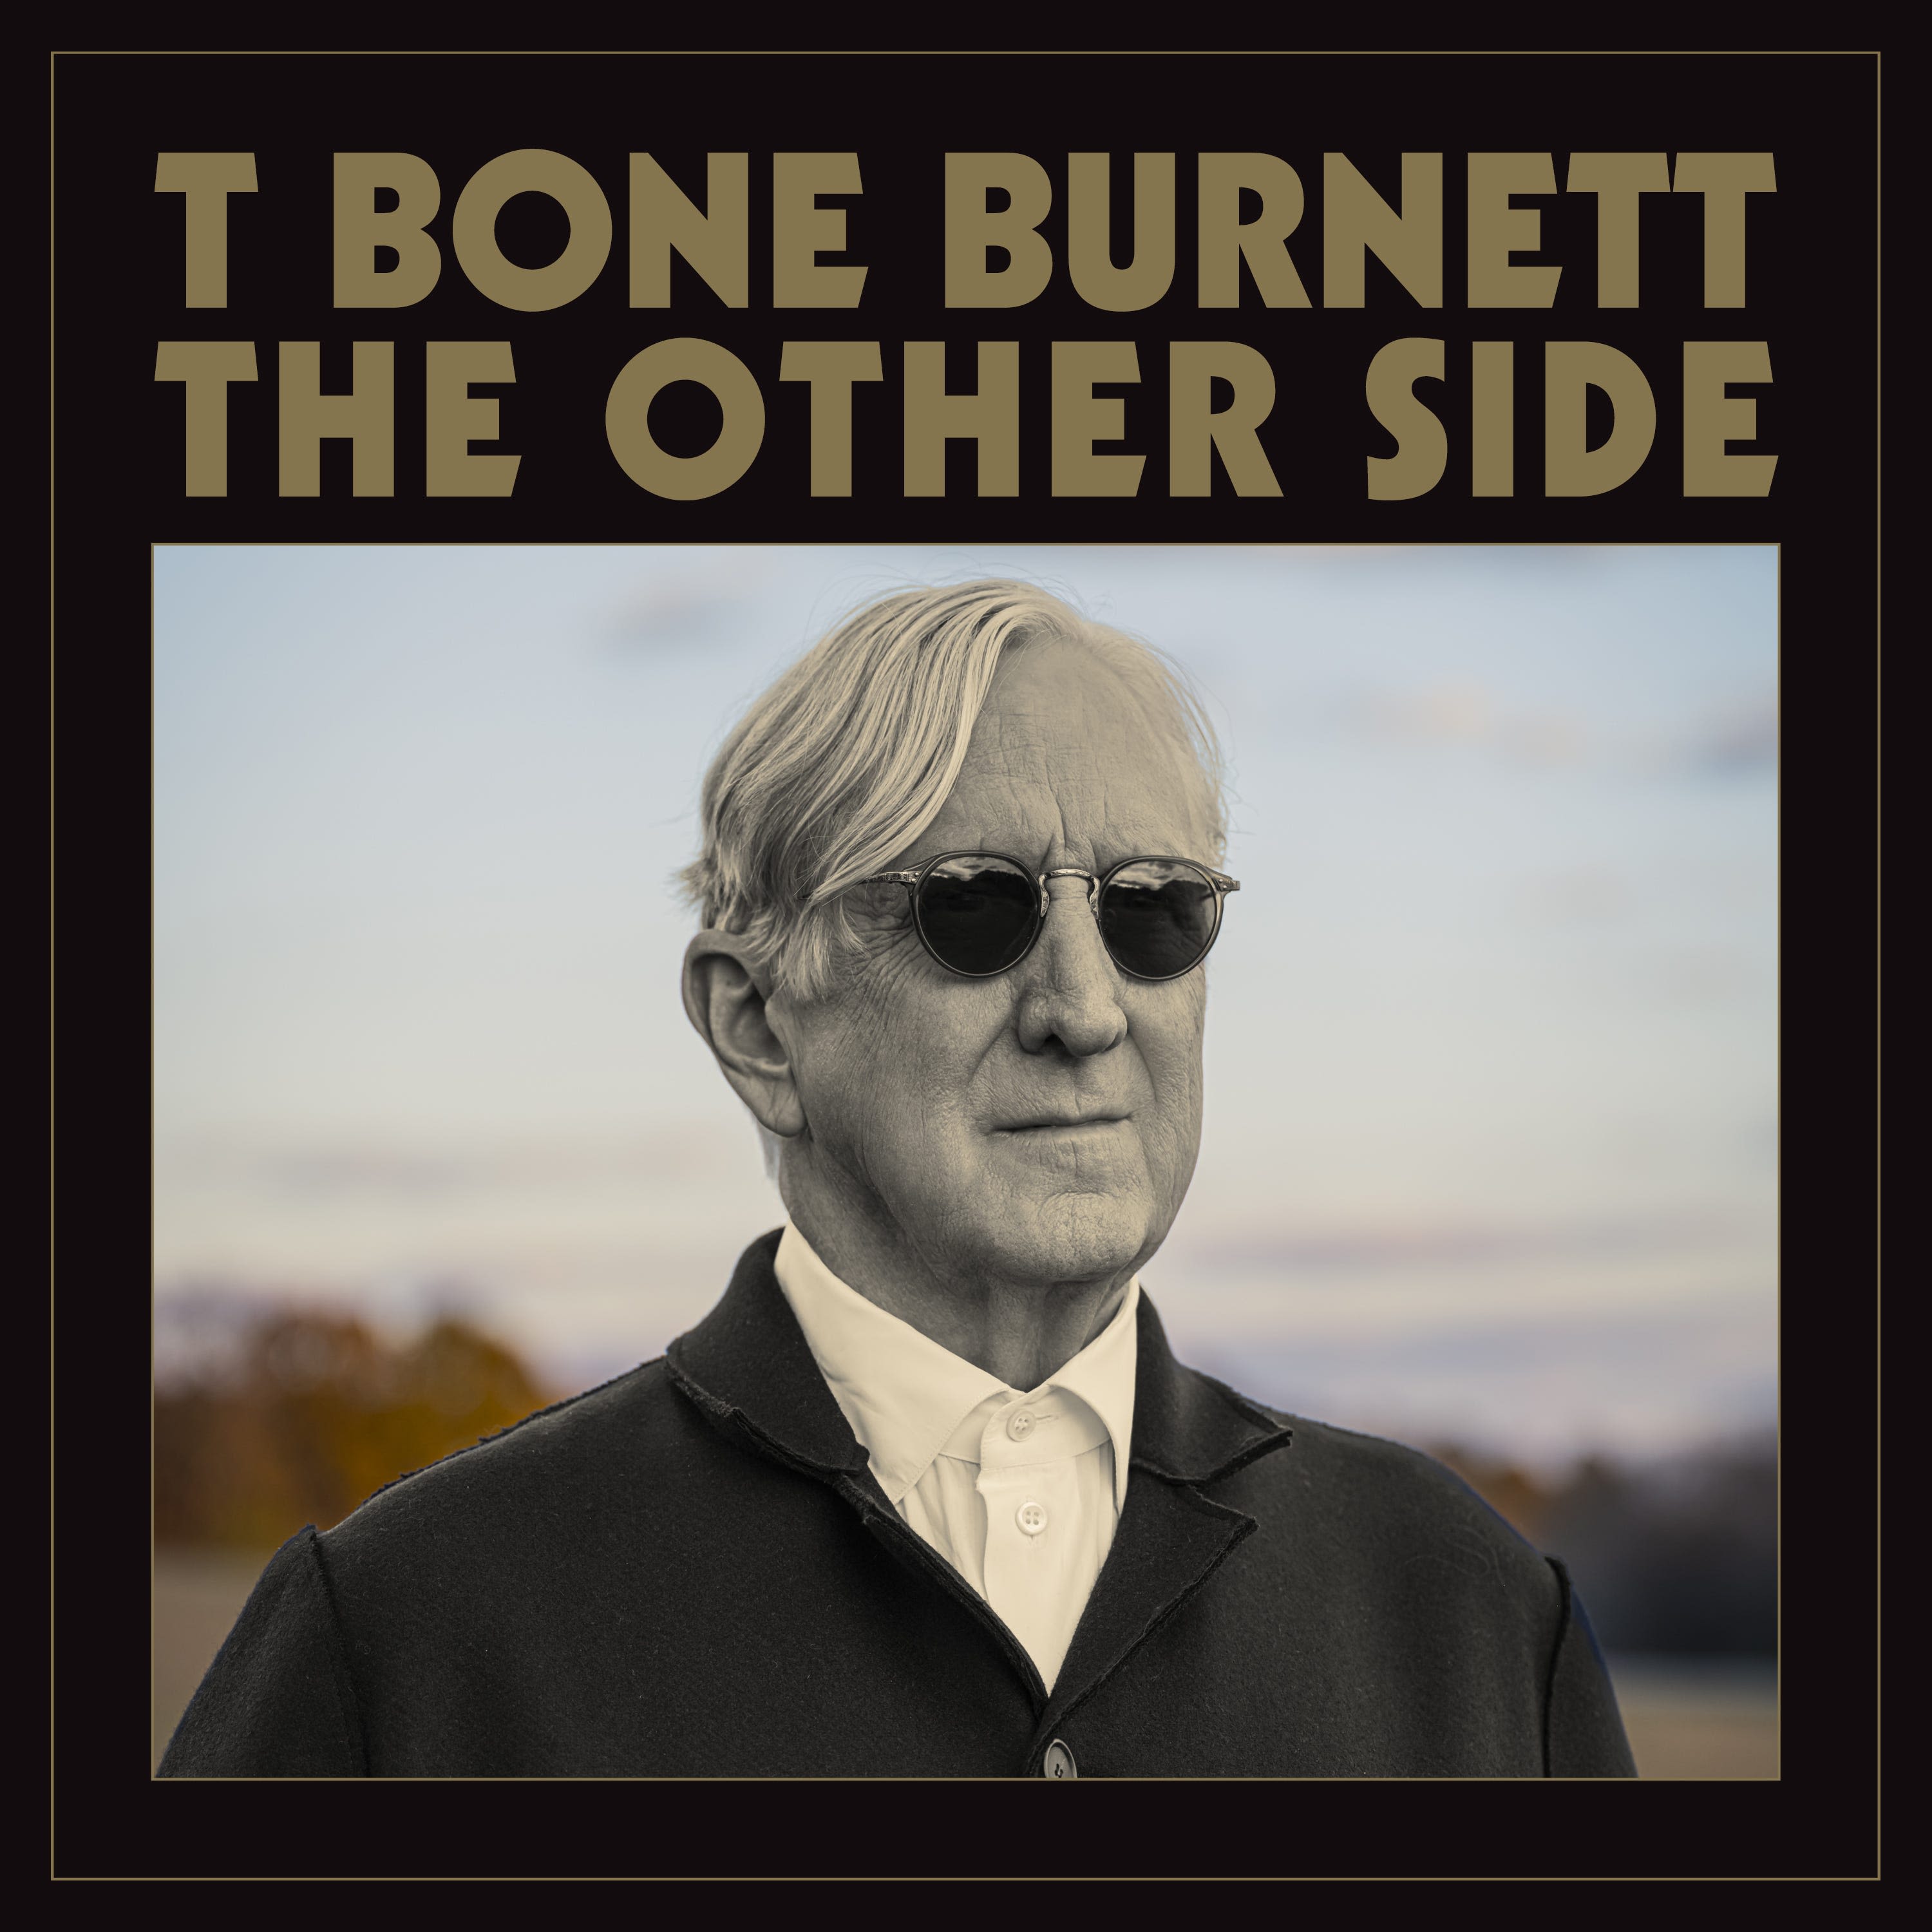 T Bone Burnett returns to relevance with his soulful new album 'The Other Side'